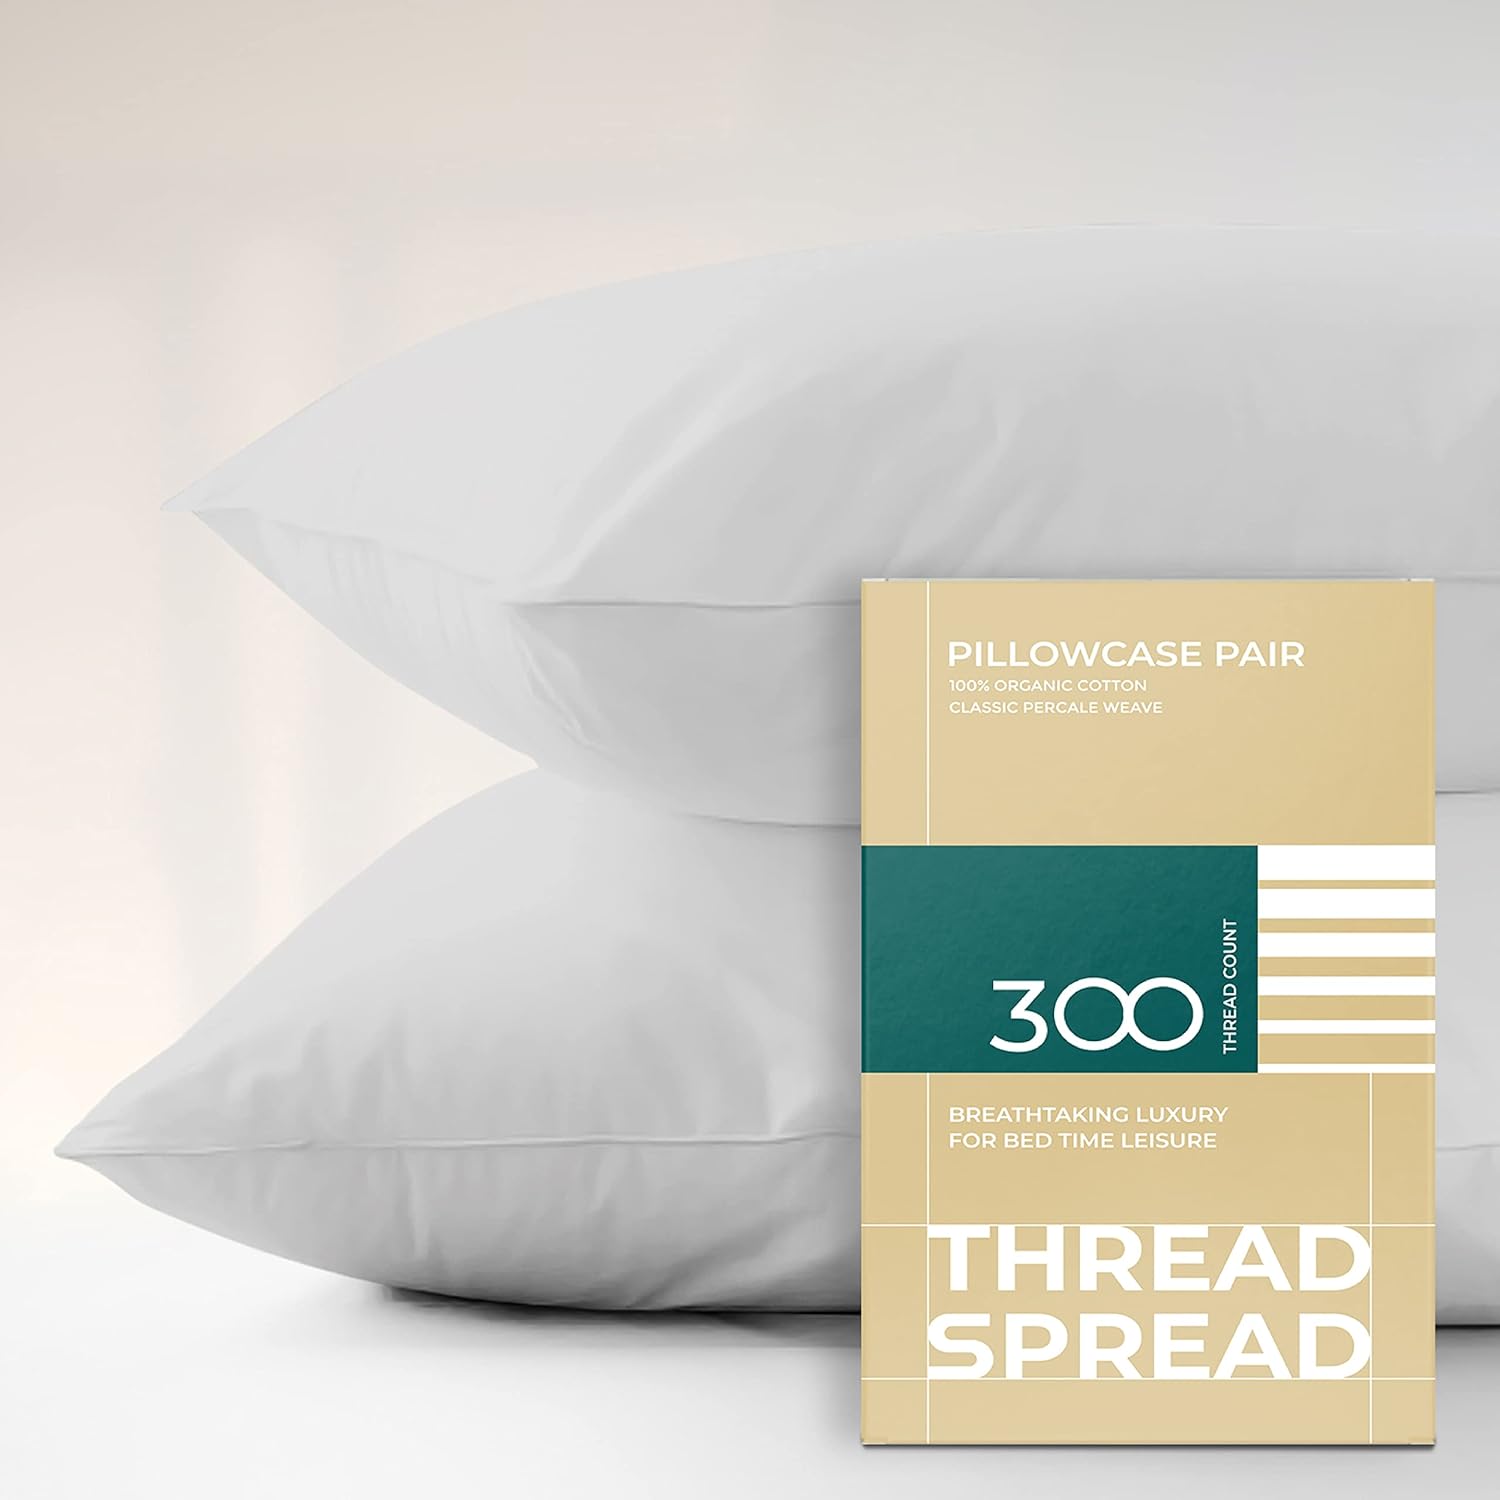 THREAD SPREAD 100% Organic Cotton Pillowcases - Soft and Crisp, Cooling Percale Weave, Breathable Pillow Covers, Set of 2 (Queen Size, Light Gray)